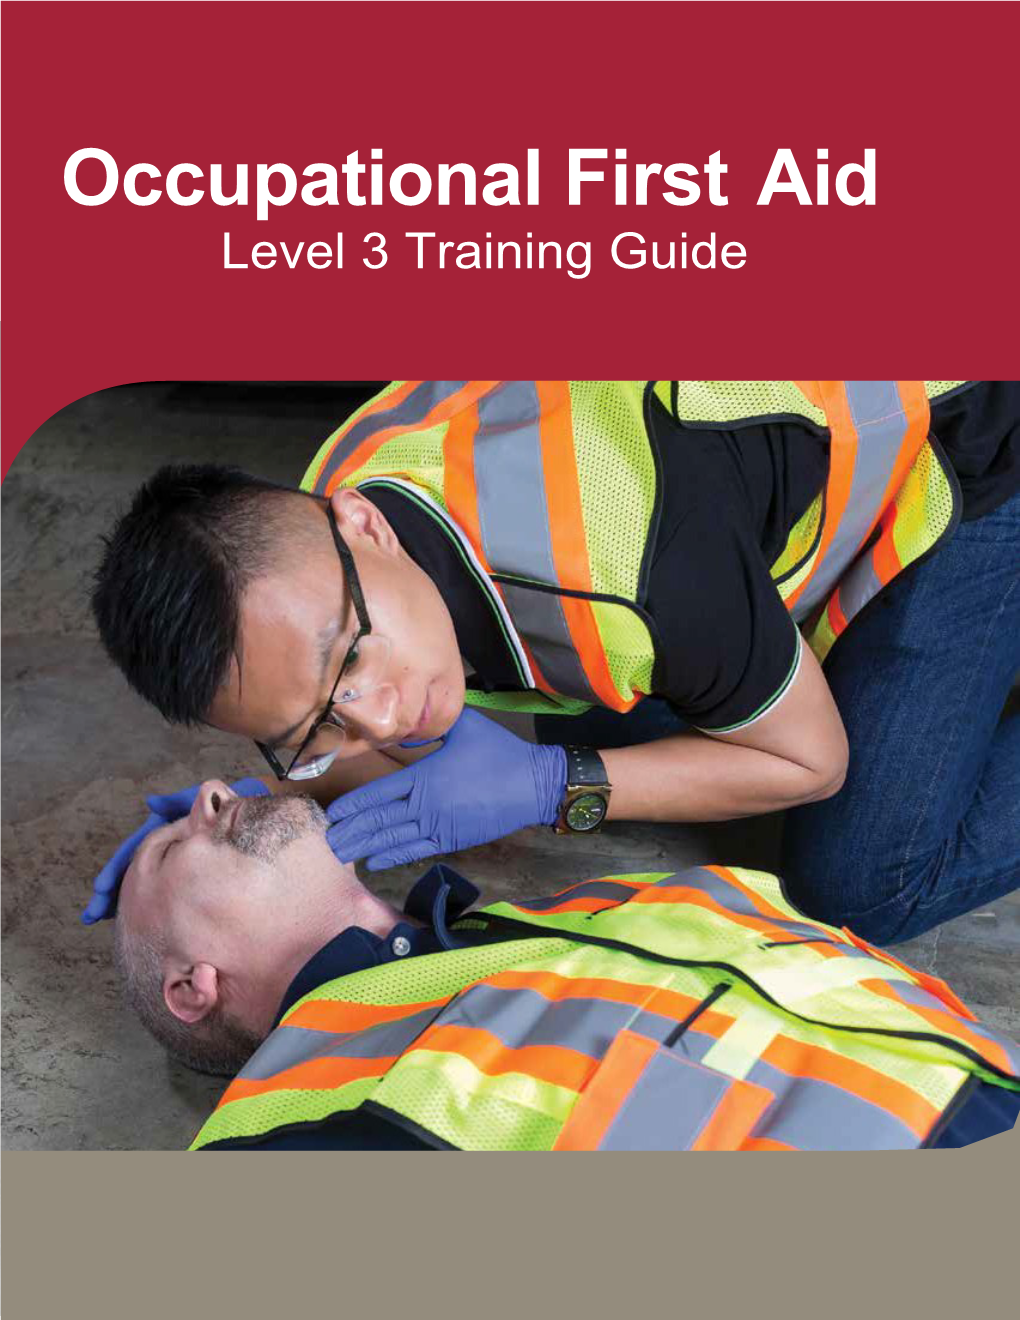 Occupational First Aid Level 3 (OFA 3) Training Guide